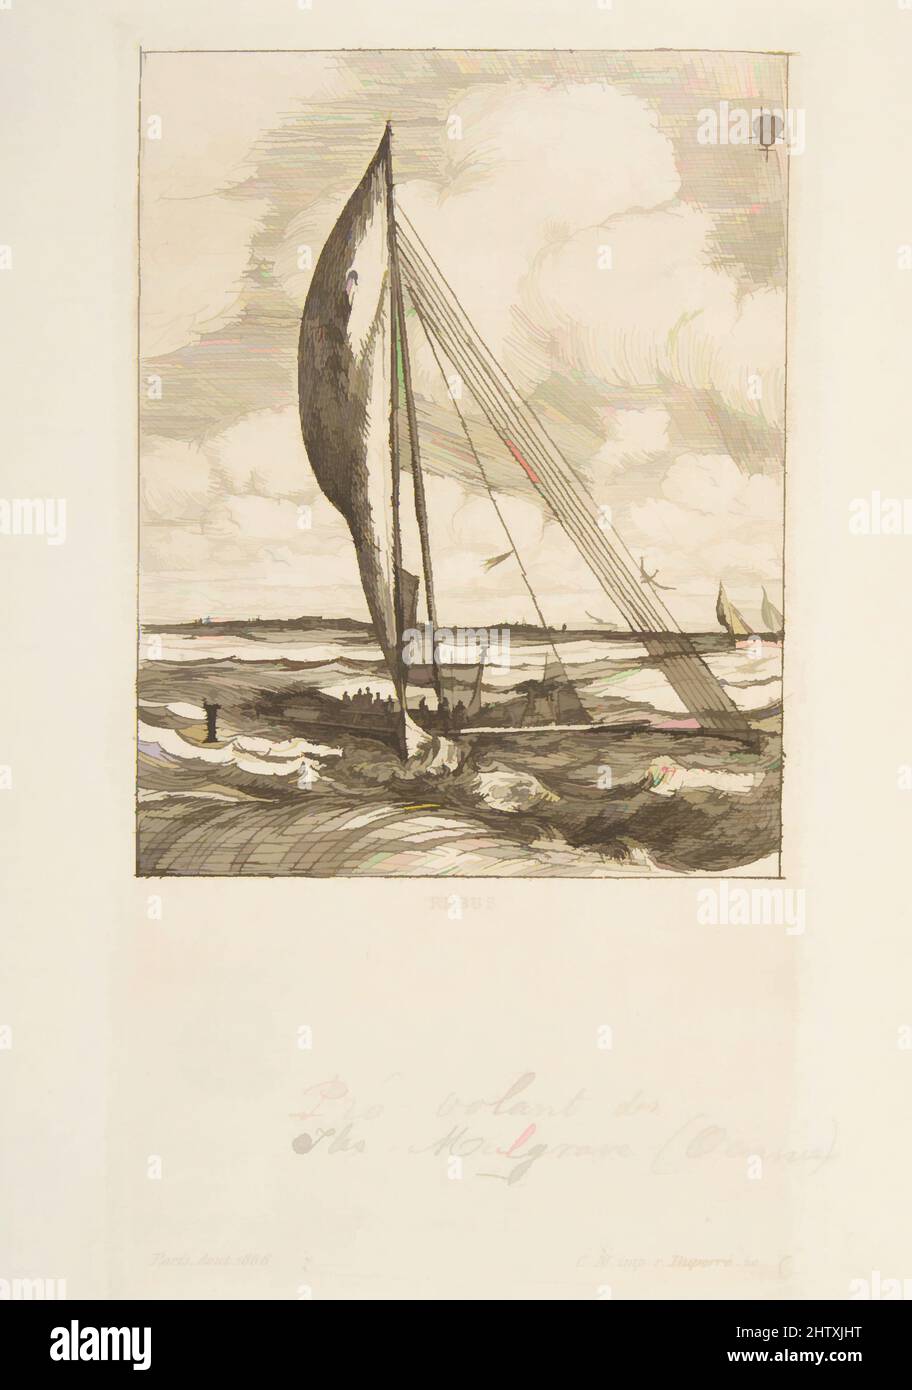 Art inspired by Pro-Volant des Iles Mulgrave, 1866, Etching and drypoint on laid paper, plate: 5 11/16 x 3 1/8 in. (14.4 x 7.9 cm), Prints, Charles Meryon (French, 1821–1868, Classic works modernized by Artotop with a splash of modernity. Shapes, color and value, eye-catching visual impact on art. Emotions through freedom of artworks in a contemporary way. A timeless message pursuing a wildly creative new direction. Artists turning to the digital medium and creating the Artotop NFT Stock Photo